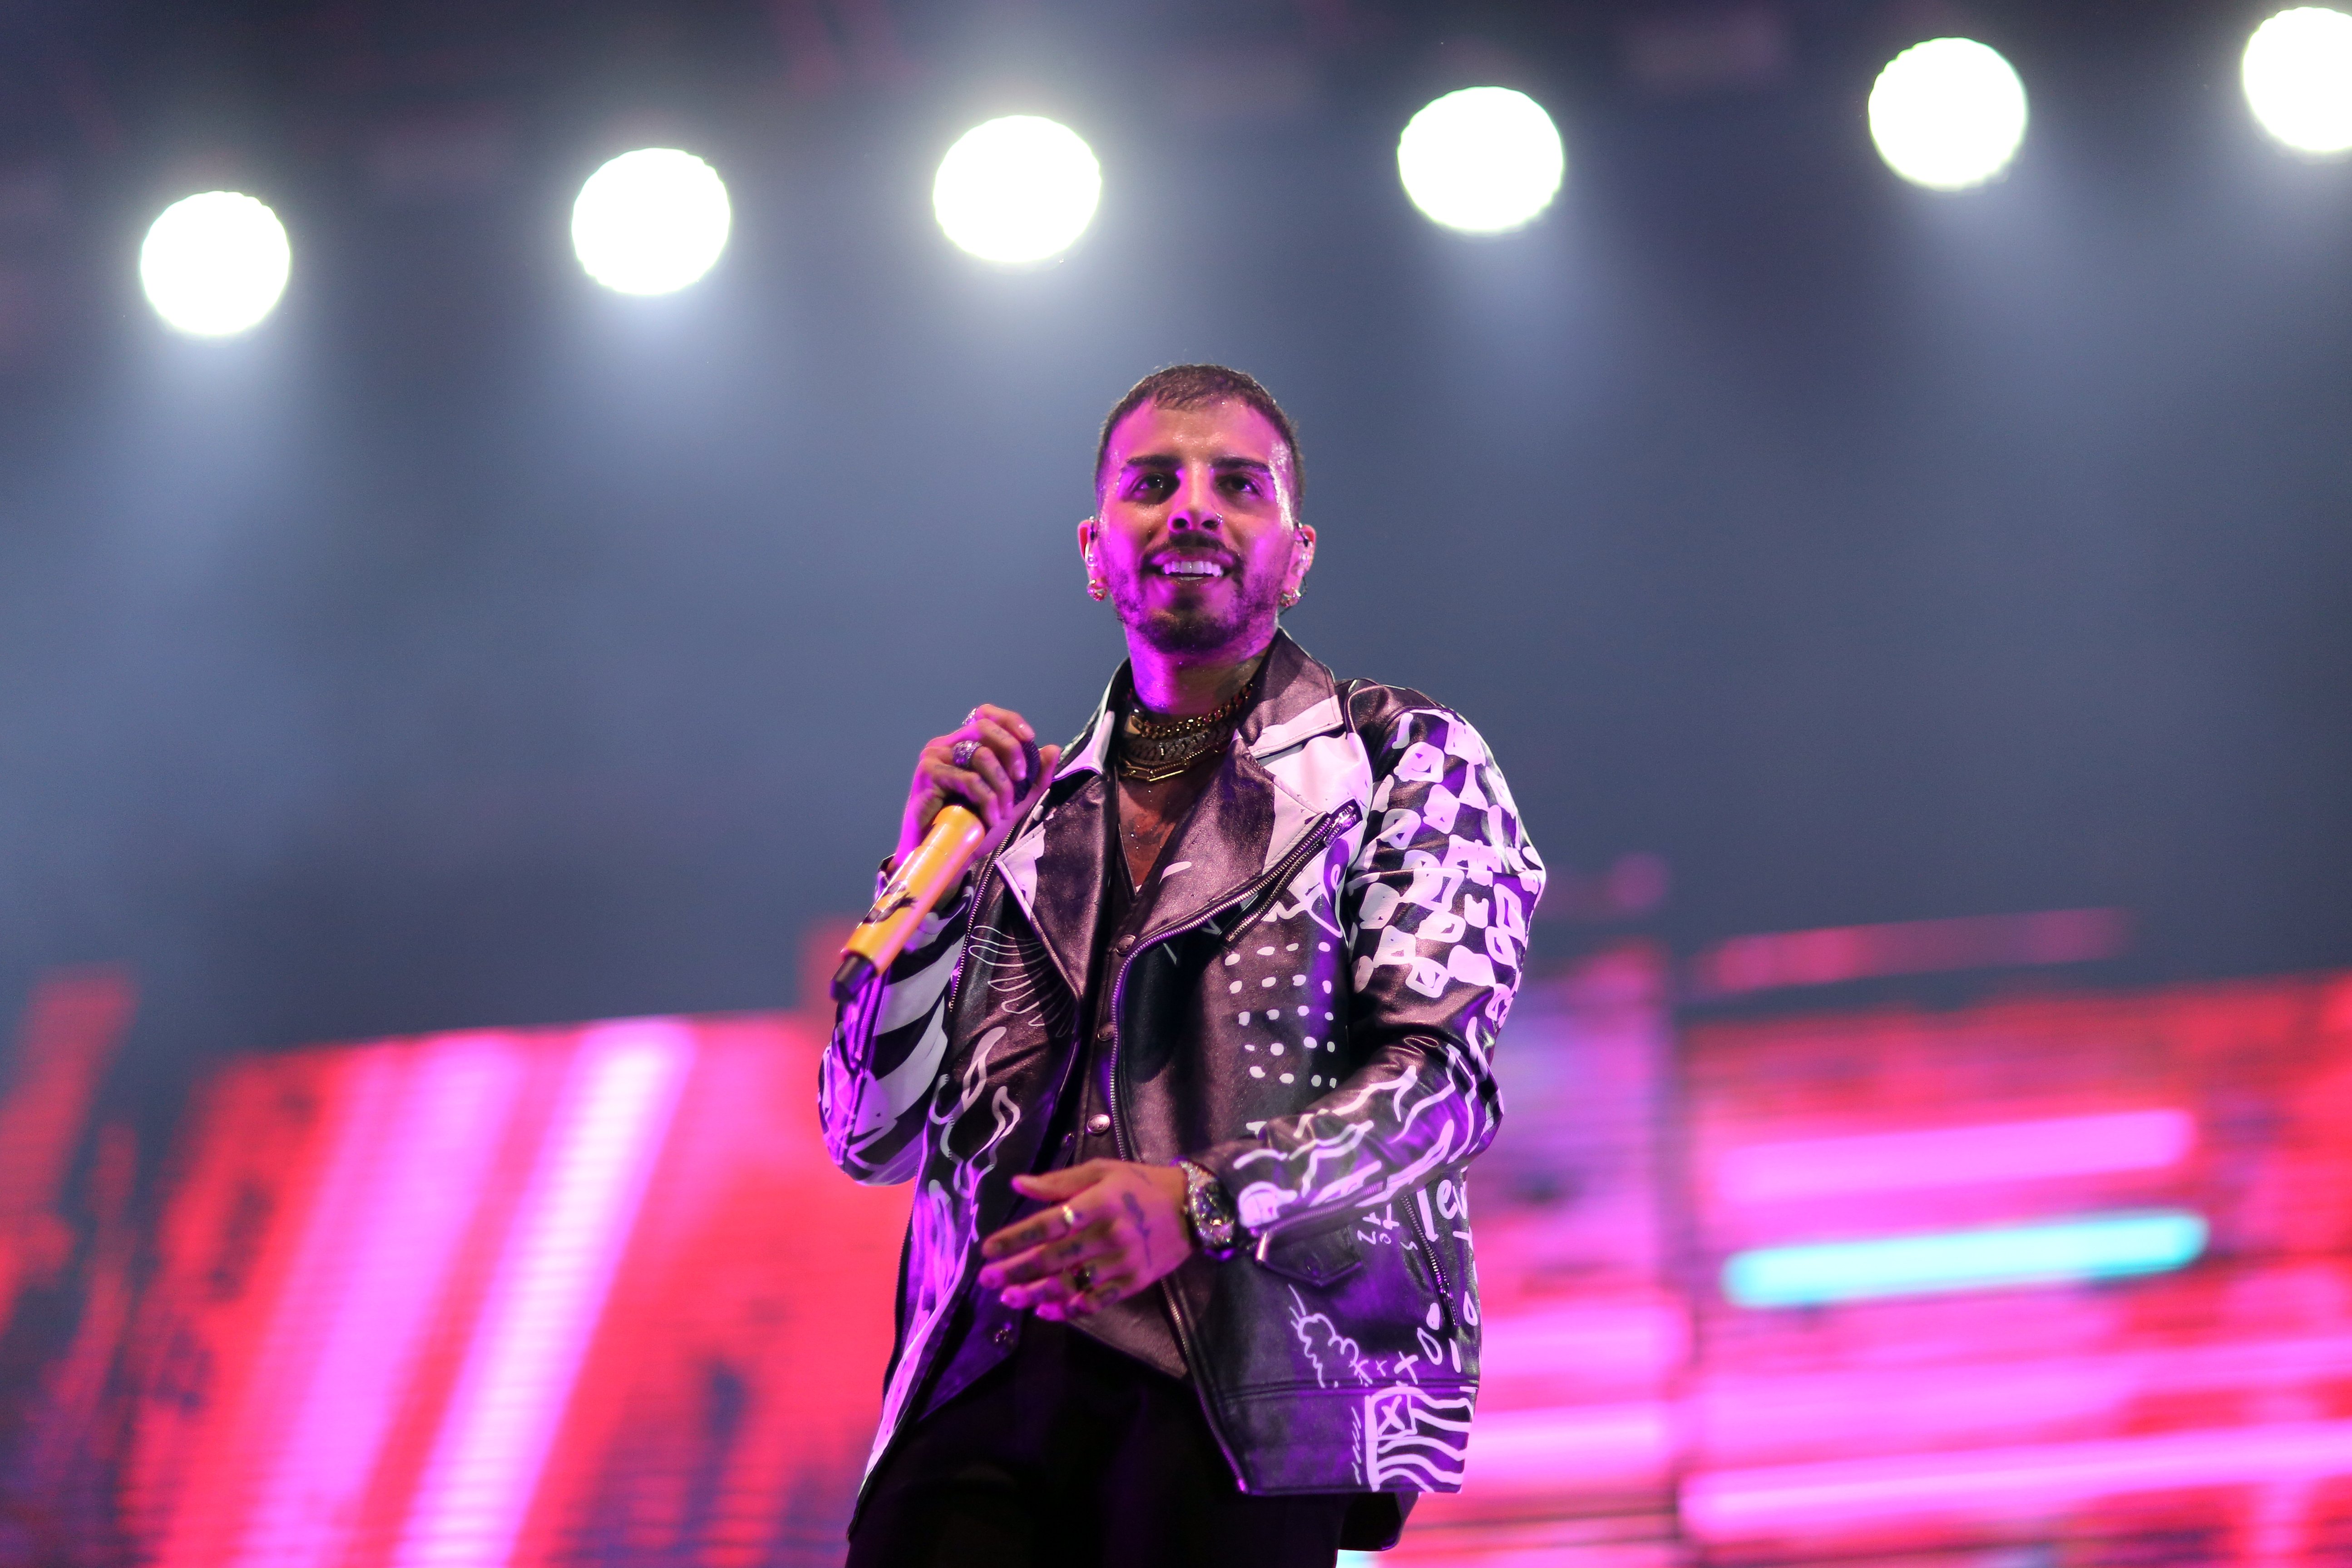 MESQUITE, TX - DECEMBER 11: Puerto Rican rapper Rauw Alejandro performs on stage during his 'World' Tour 2021 at Mesquite Arena on December 11, 2021 in Mesquite, Texas. (Photo by Omar Vega/Getty Images)